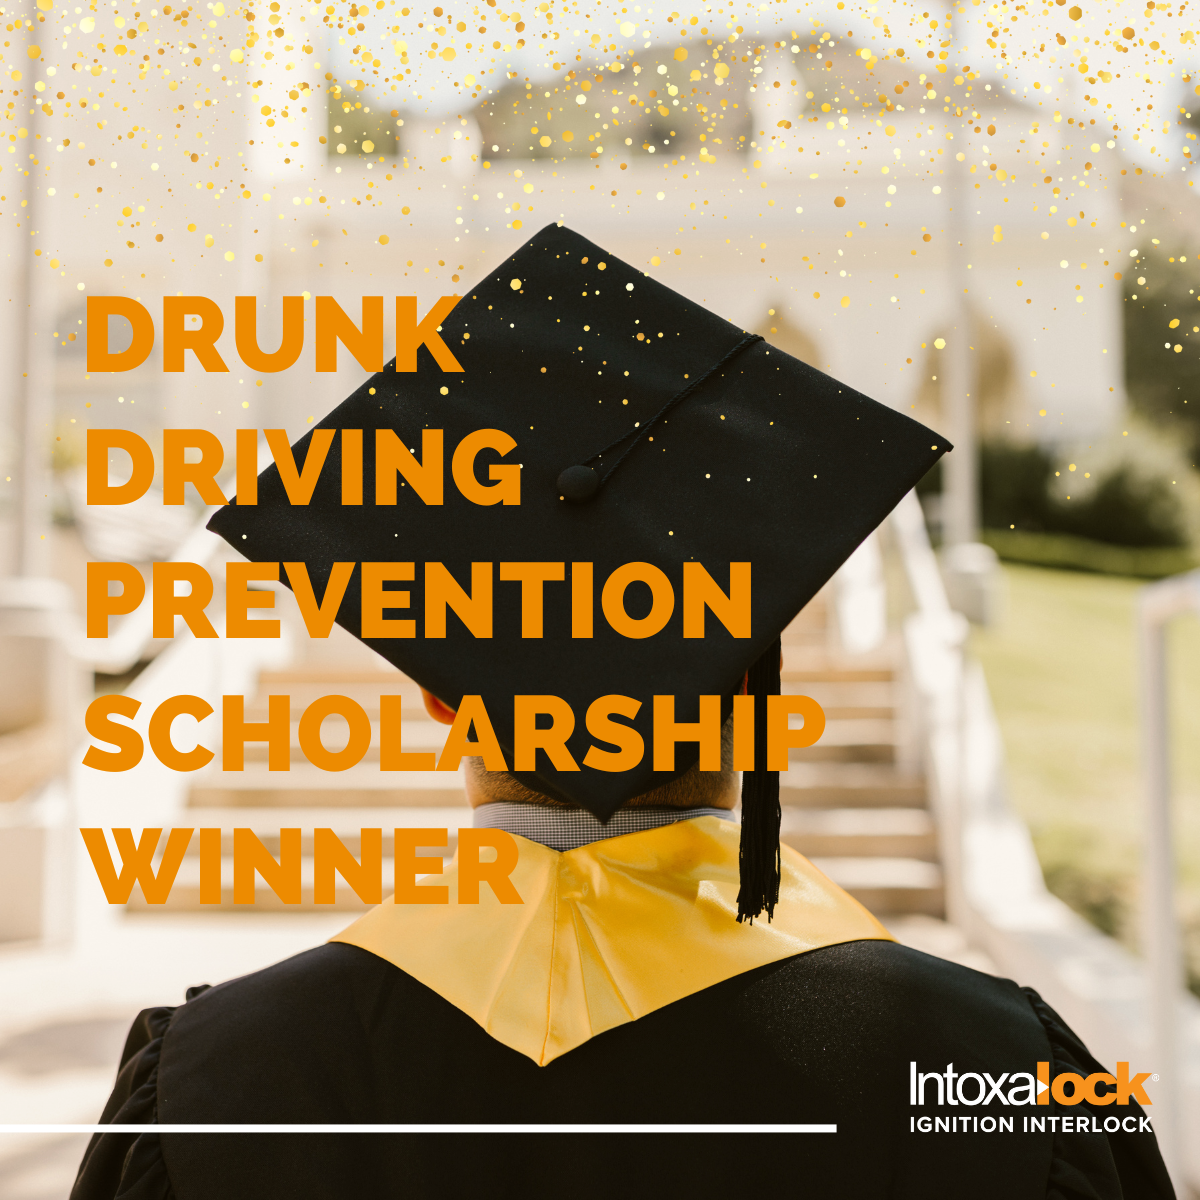 Angel Rodriguez Wins Intoxalock Drunk Driving Prevention Scholarship